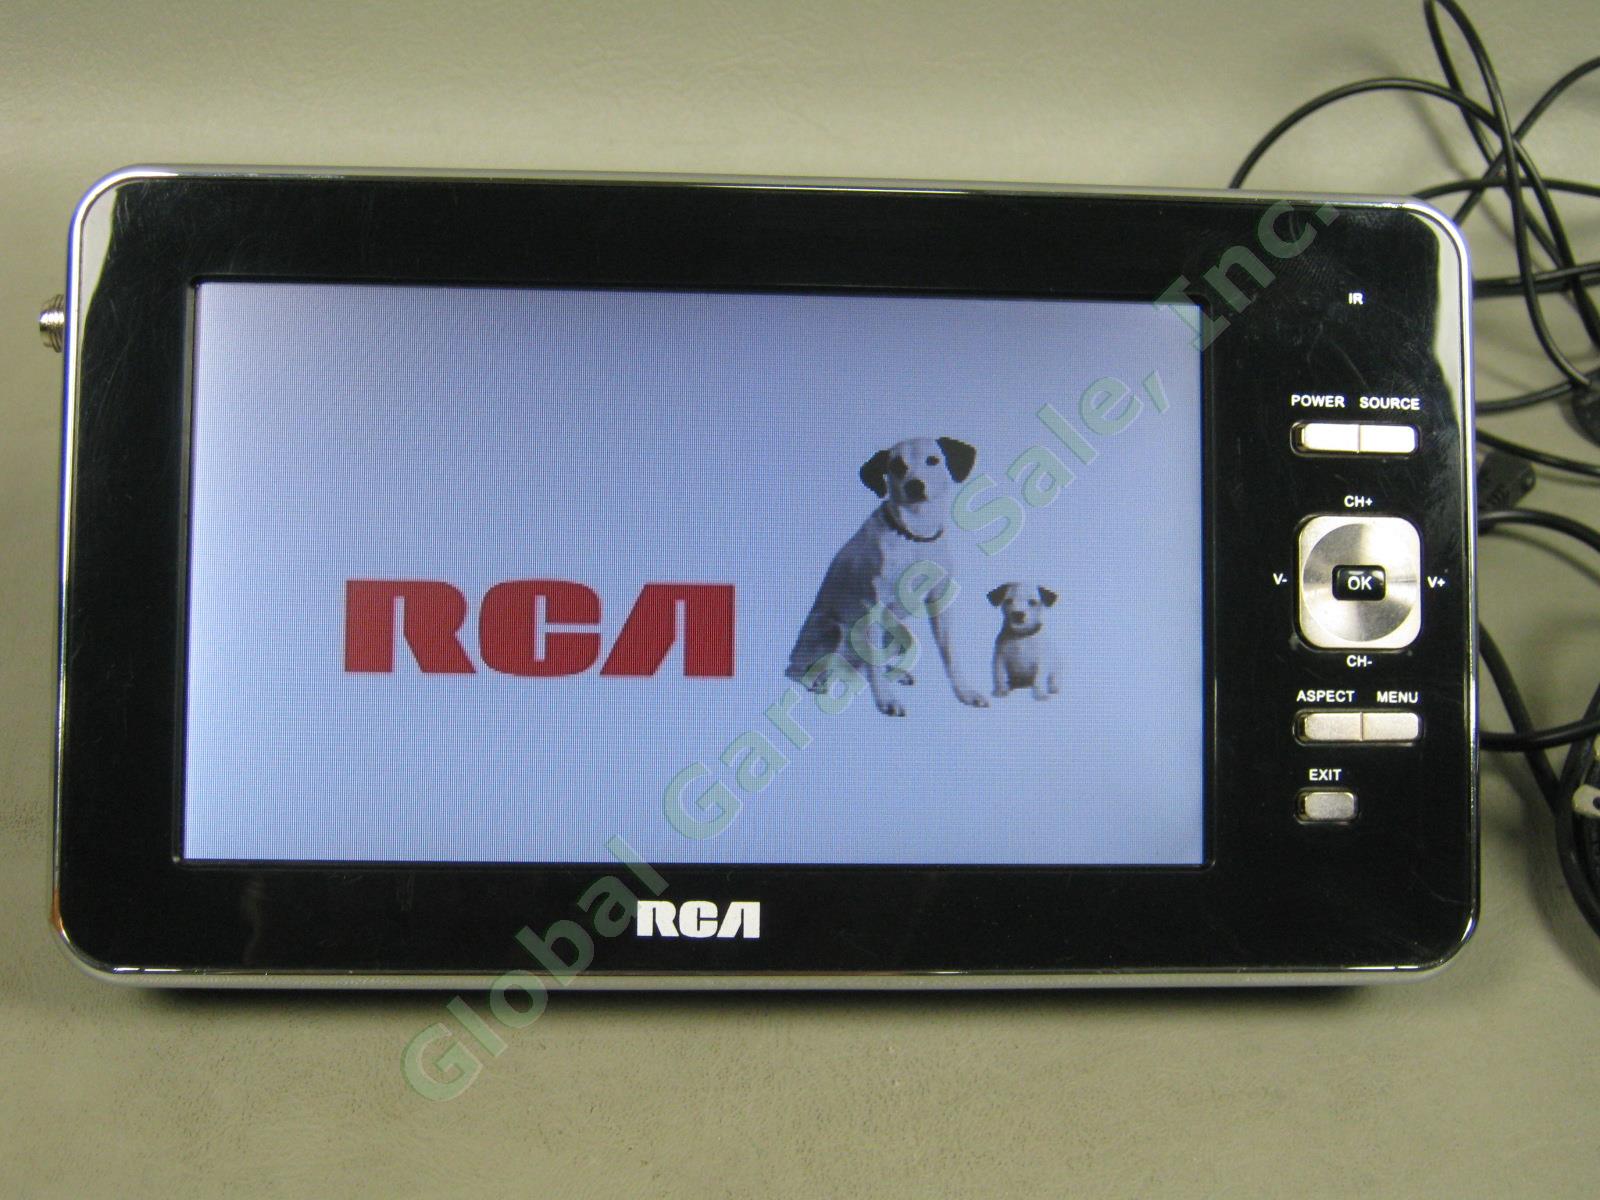 RCA 7" Portable Digital LCD TV DPTM70R Rechargeable SD USB With Case Remote +NR! 1